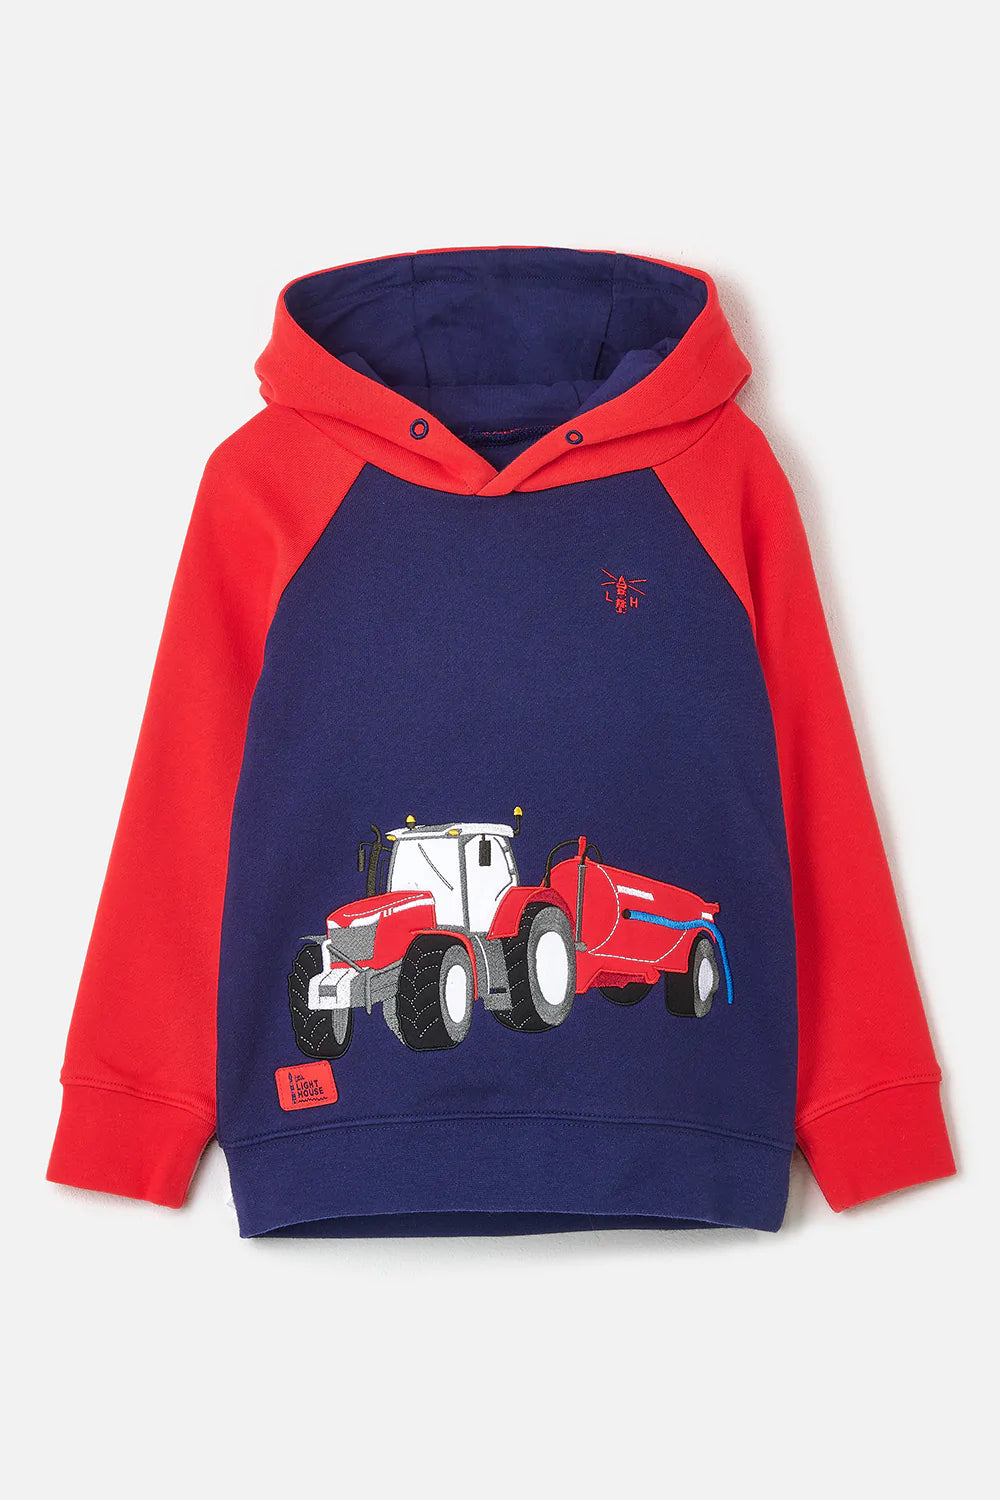 Red Tractor Hoody - Little Lighthouse